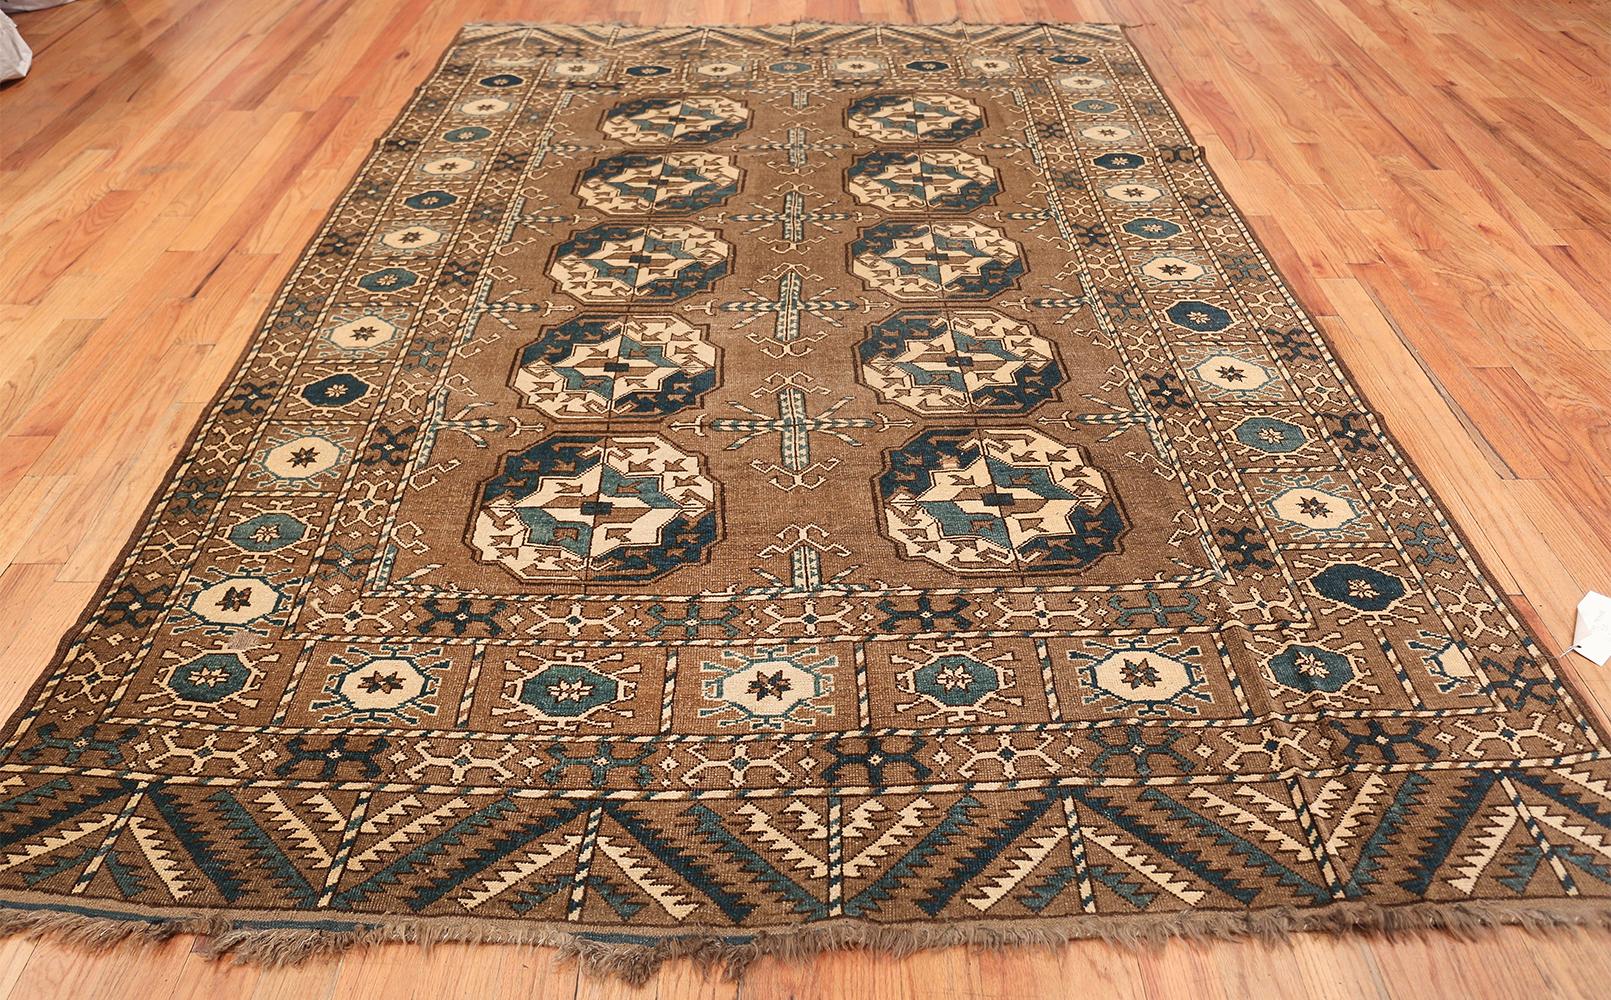 Beautiful and decorative earthtone antique Afghan rug, Country of origin: Afghanistan, circa date: First Quarter of The 20th century. Size: 6 ft 7 in x 9 ft 7 in (2.01 m x 2.92 m). With an earthy central palette and plenty of angular figures within,